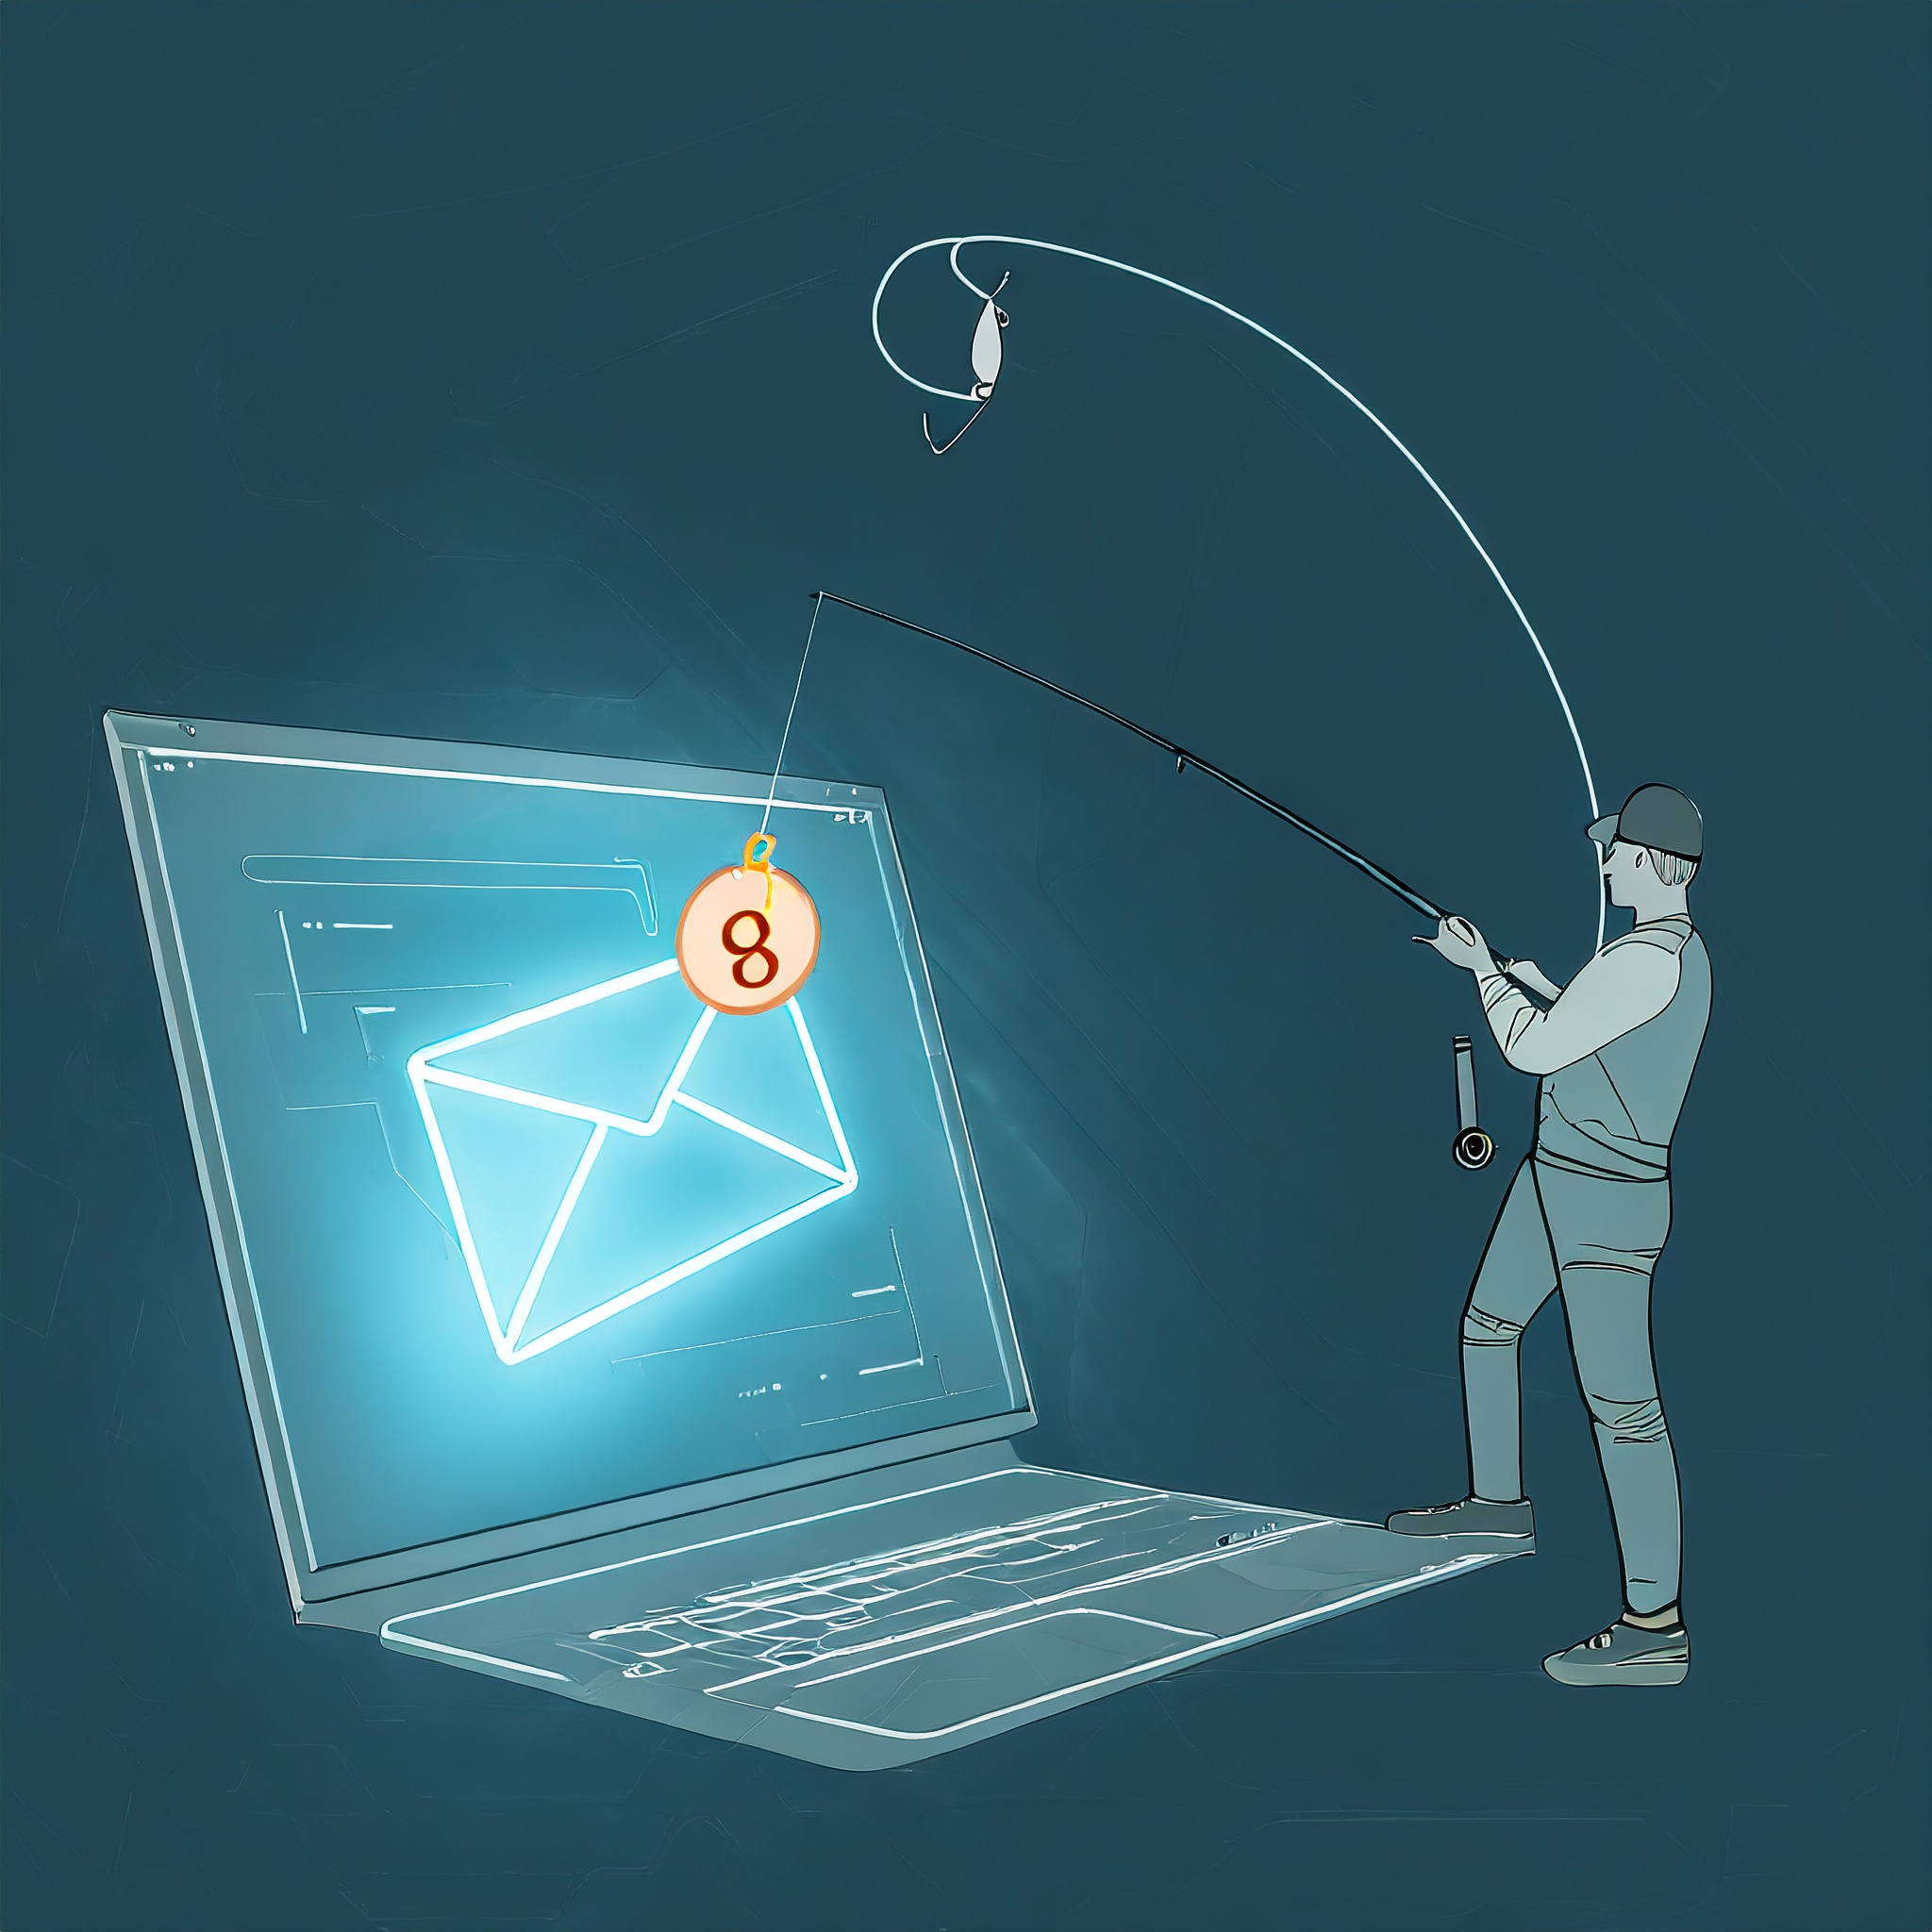 Avoid email phishing attempts